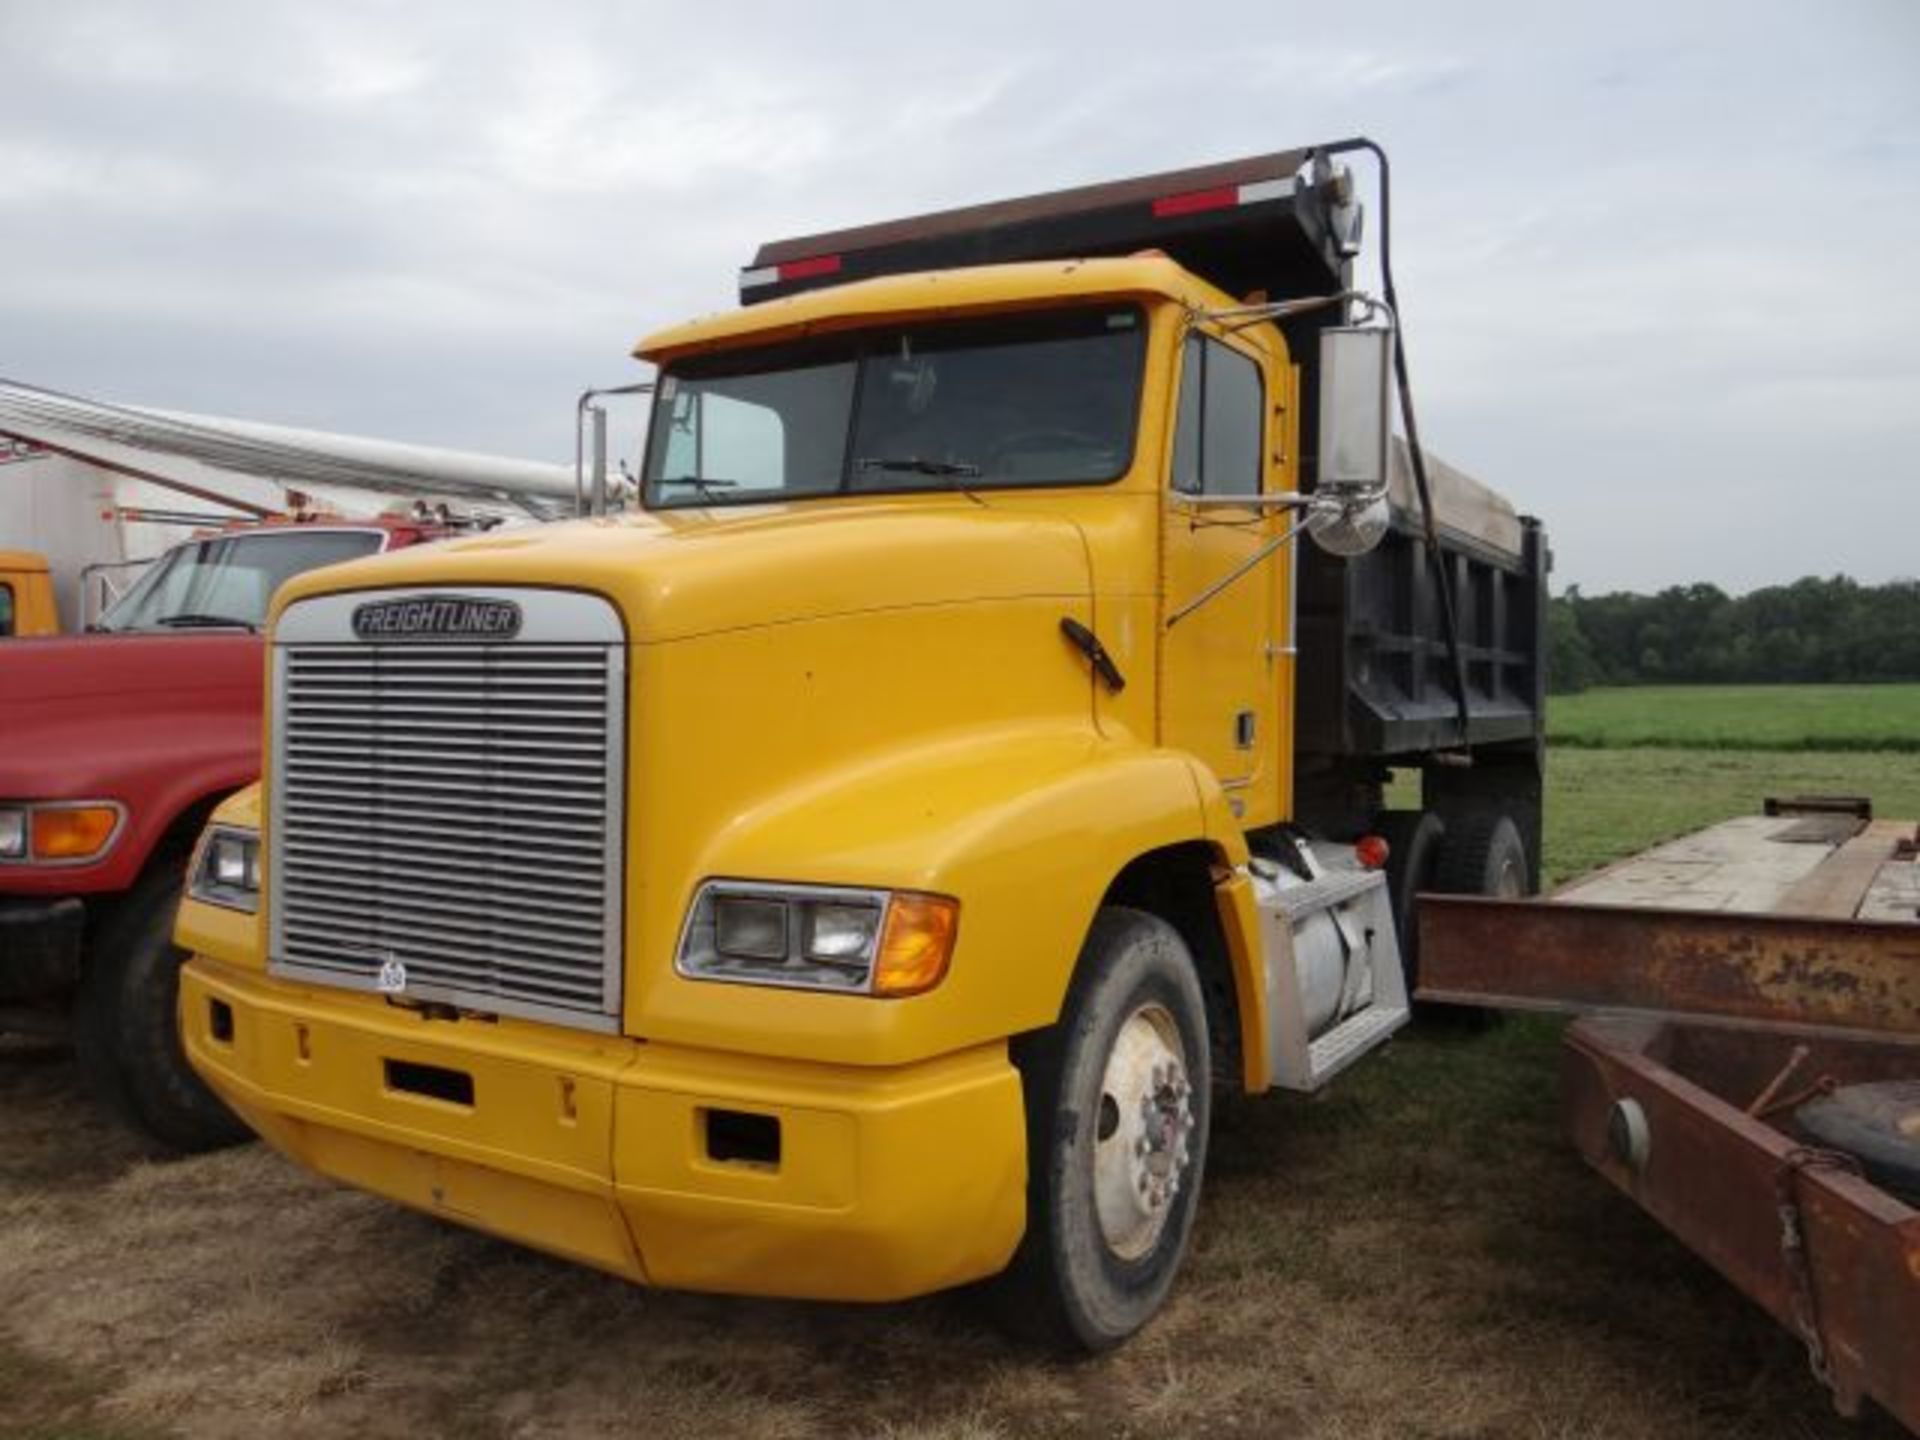 1993 Freightliner Dump Truck 400,000+ miles, 9sp, Elec Roll Tarp, Air Operated Tailgate, Title in